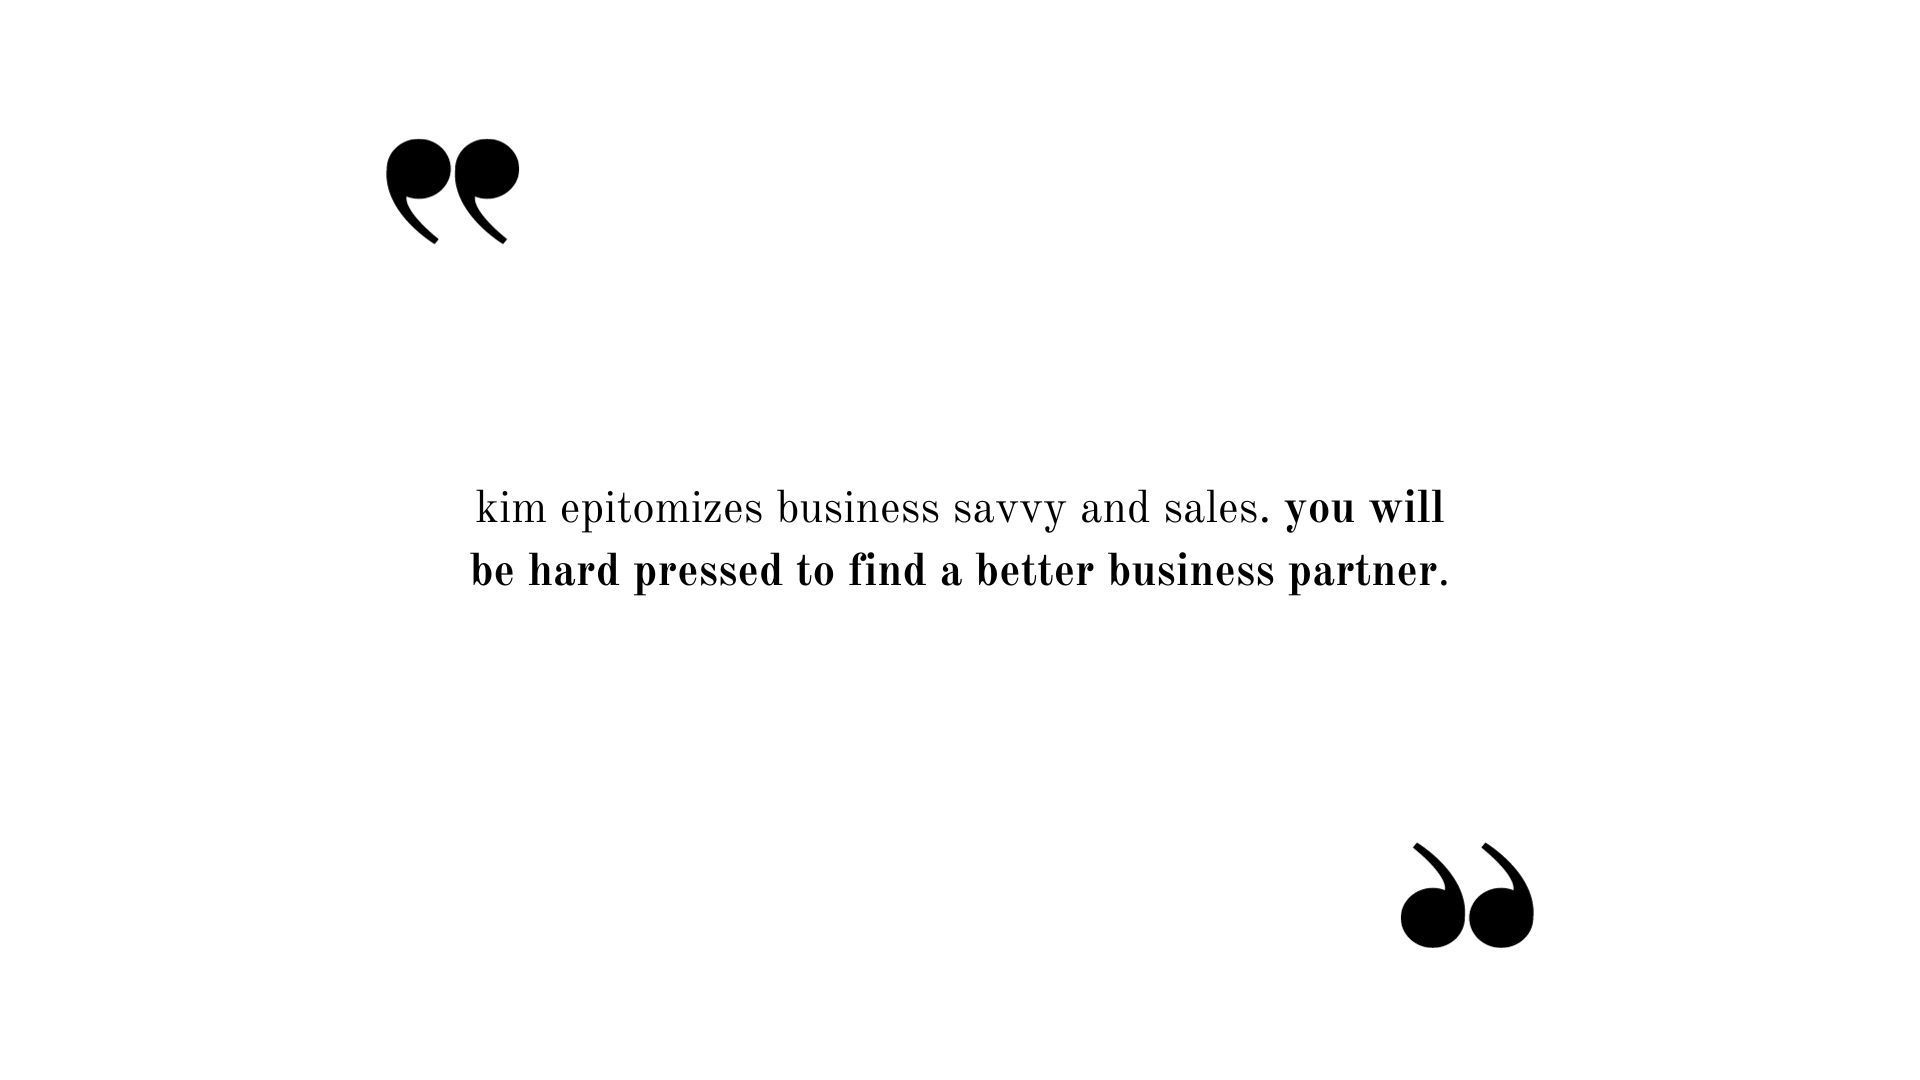 Testimonial: Kim epitomizes business savvy and sales. You will be hard pressed to find a better business partner.